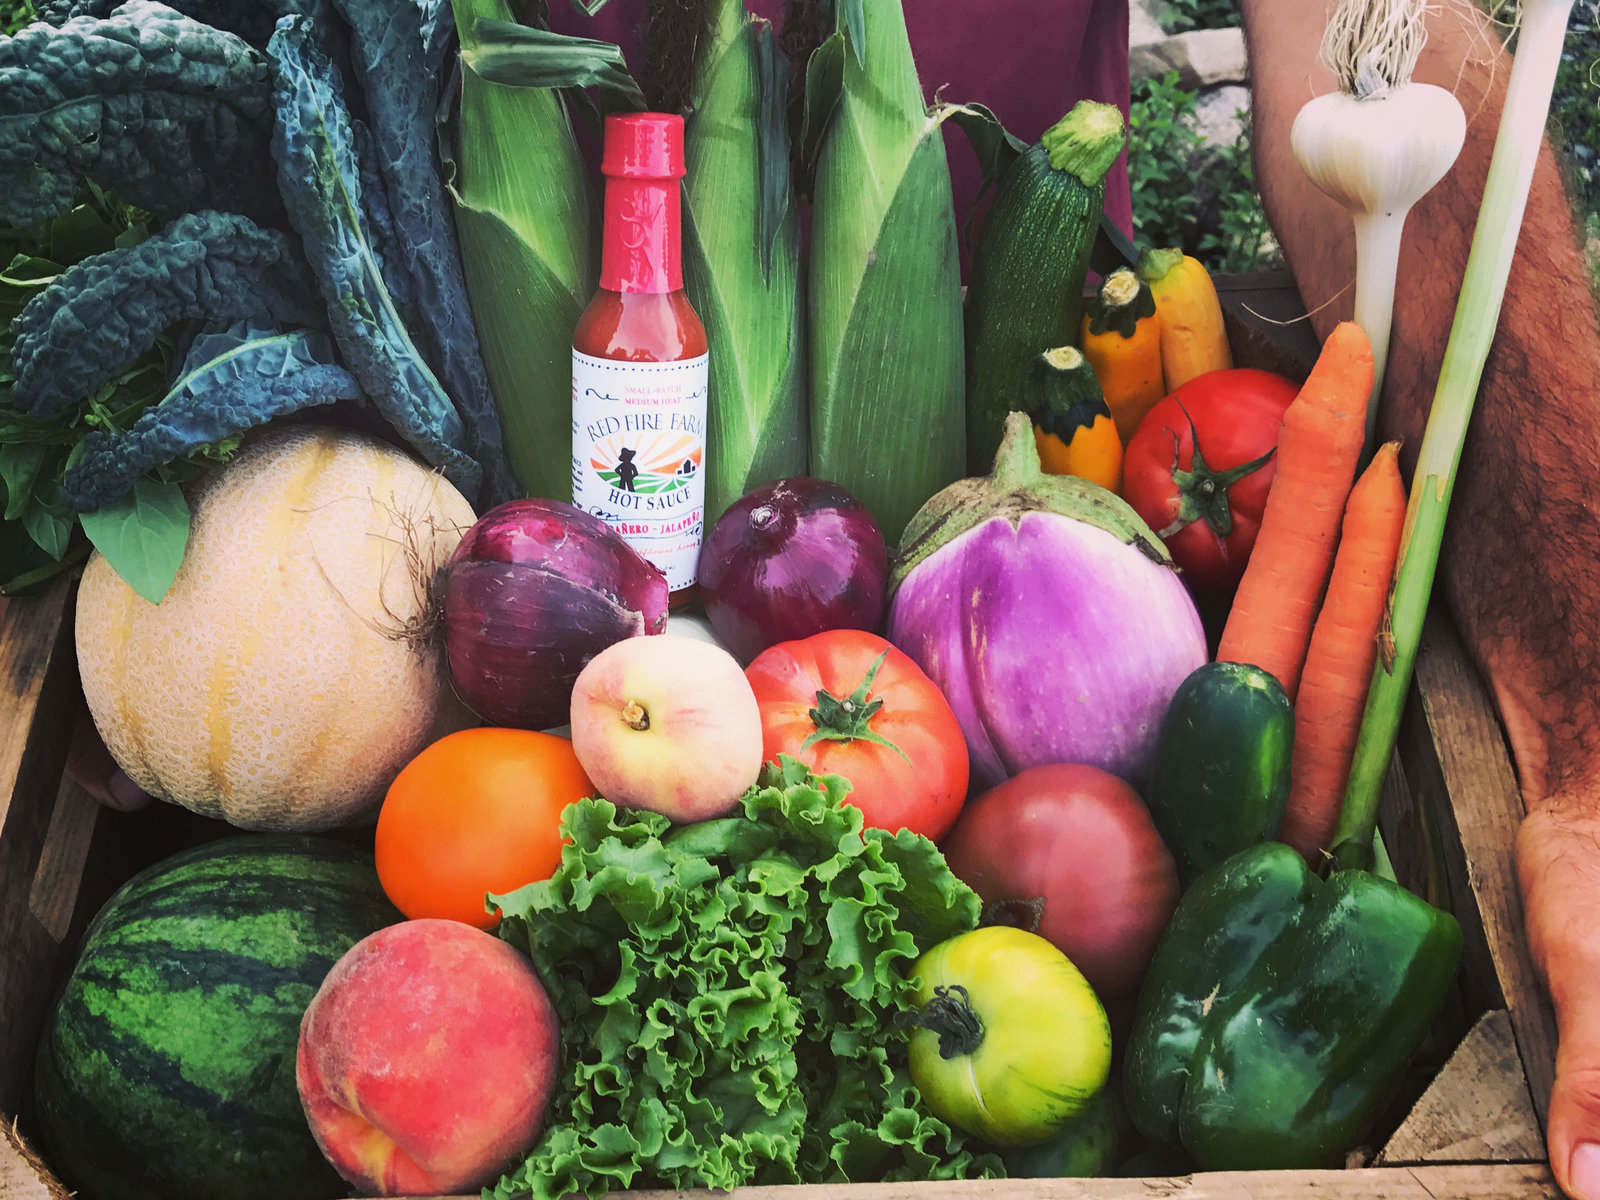 A wooden crate filled with colorful farm fresh produce and a bottle of hotsauce.